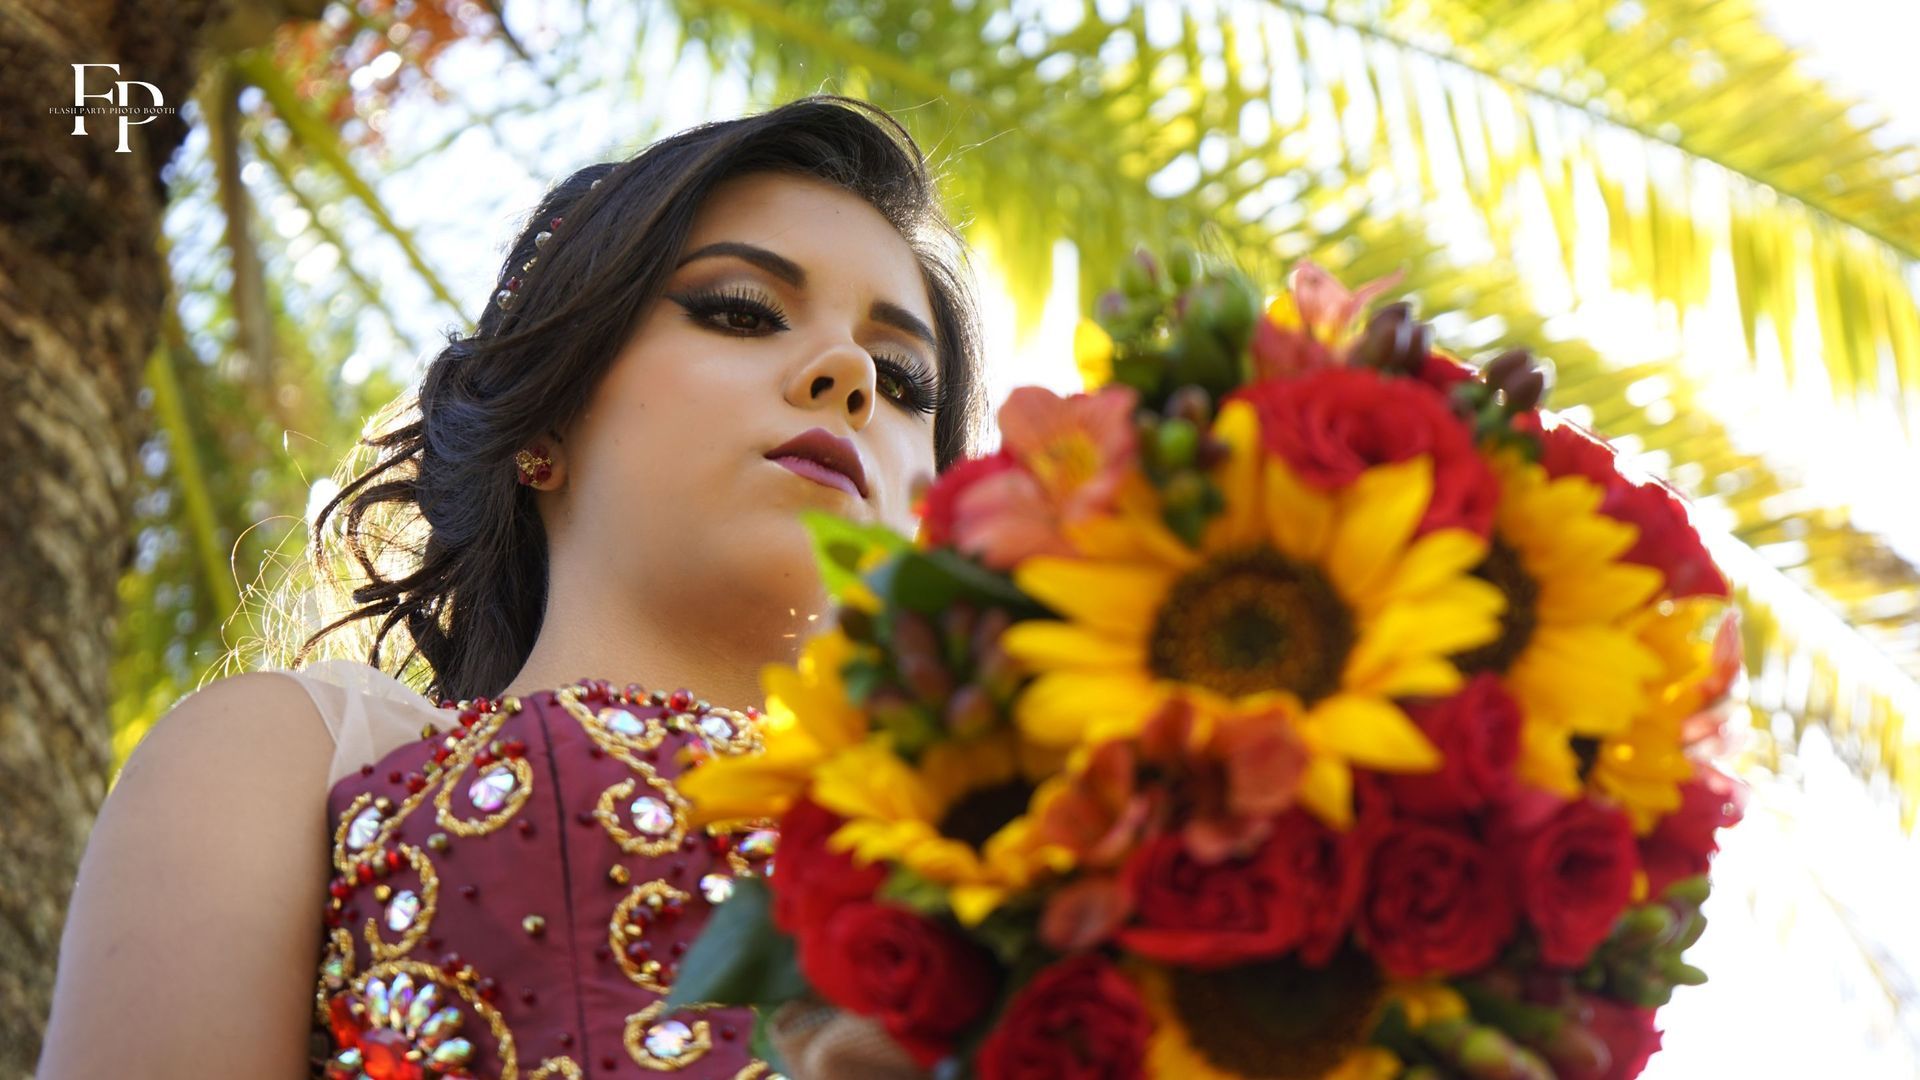 Surrounded by the vibrant colors and sweet scents of fresh blooms, the celebrant holds a bouquet of flowers at her quinceañera in DFW, her radiant smile illuminating the room.